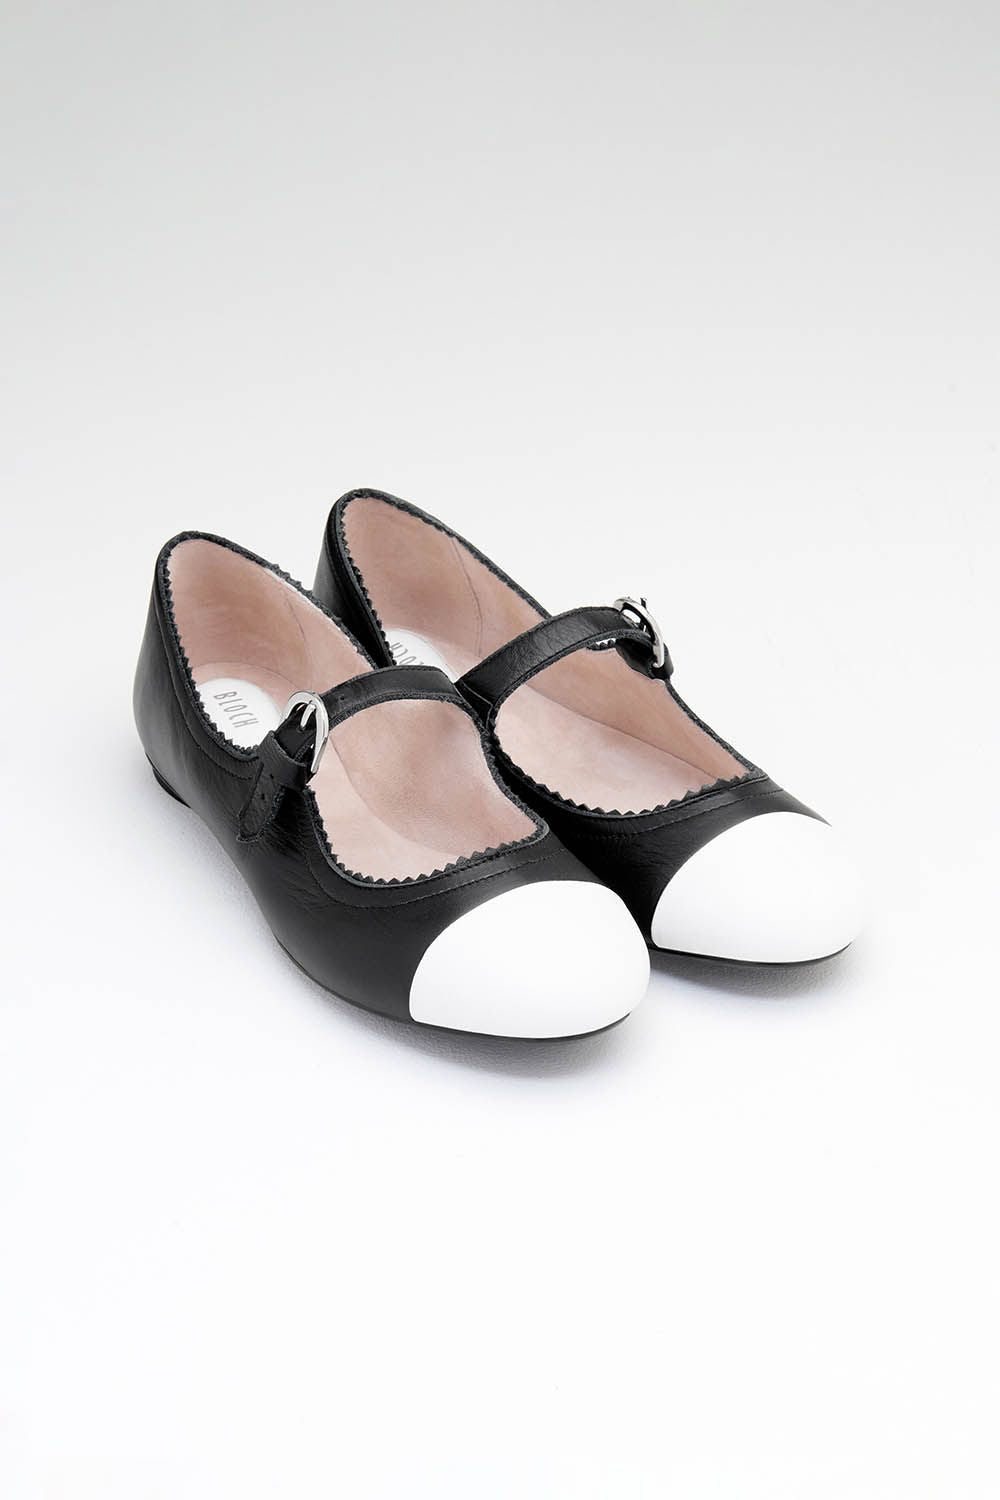 chanel black and white ballet flats